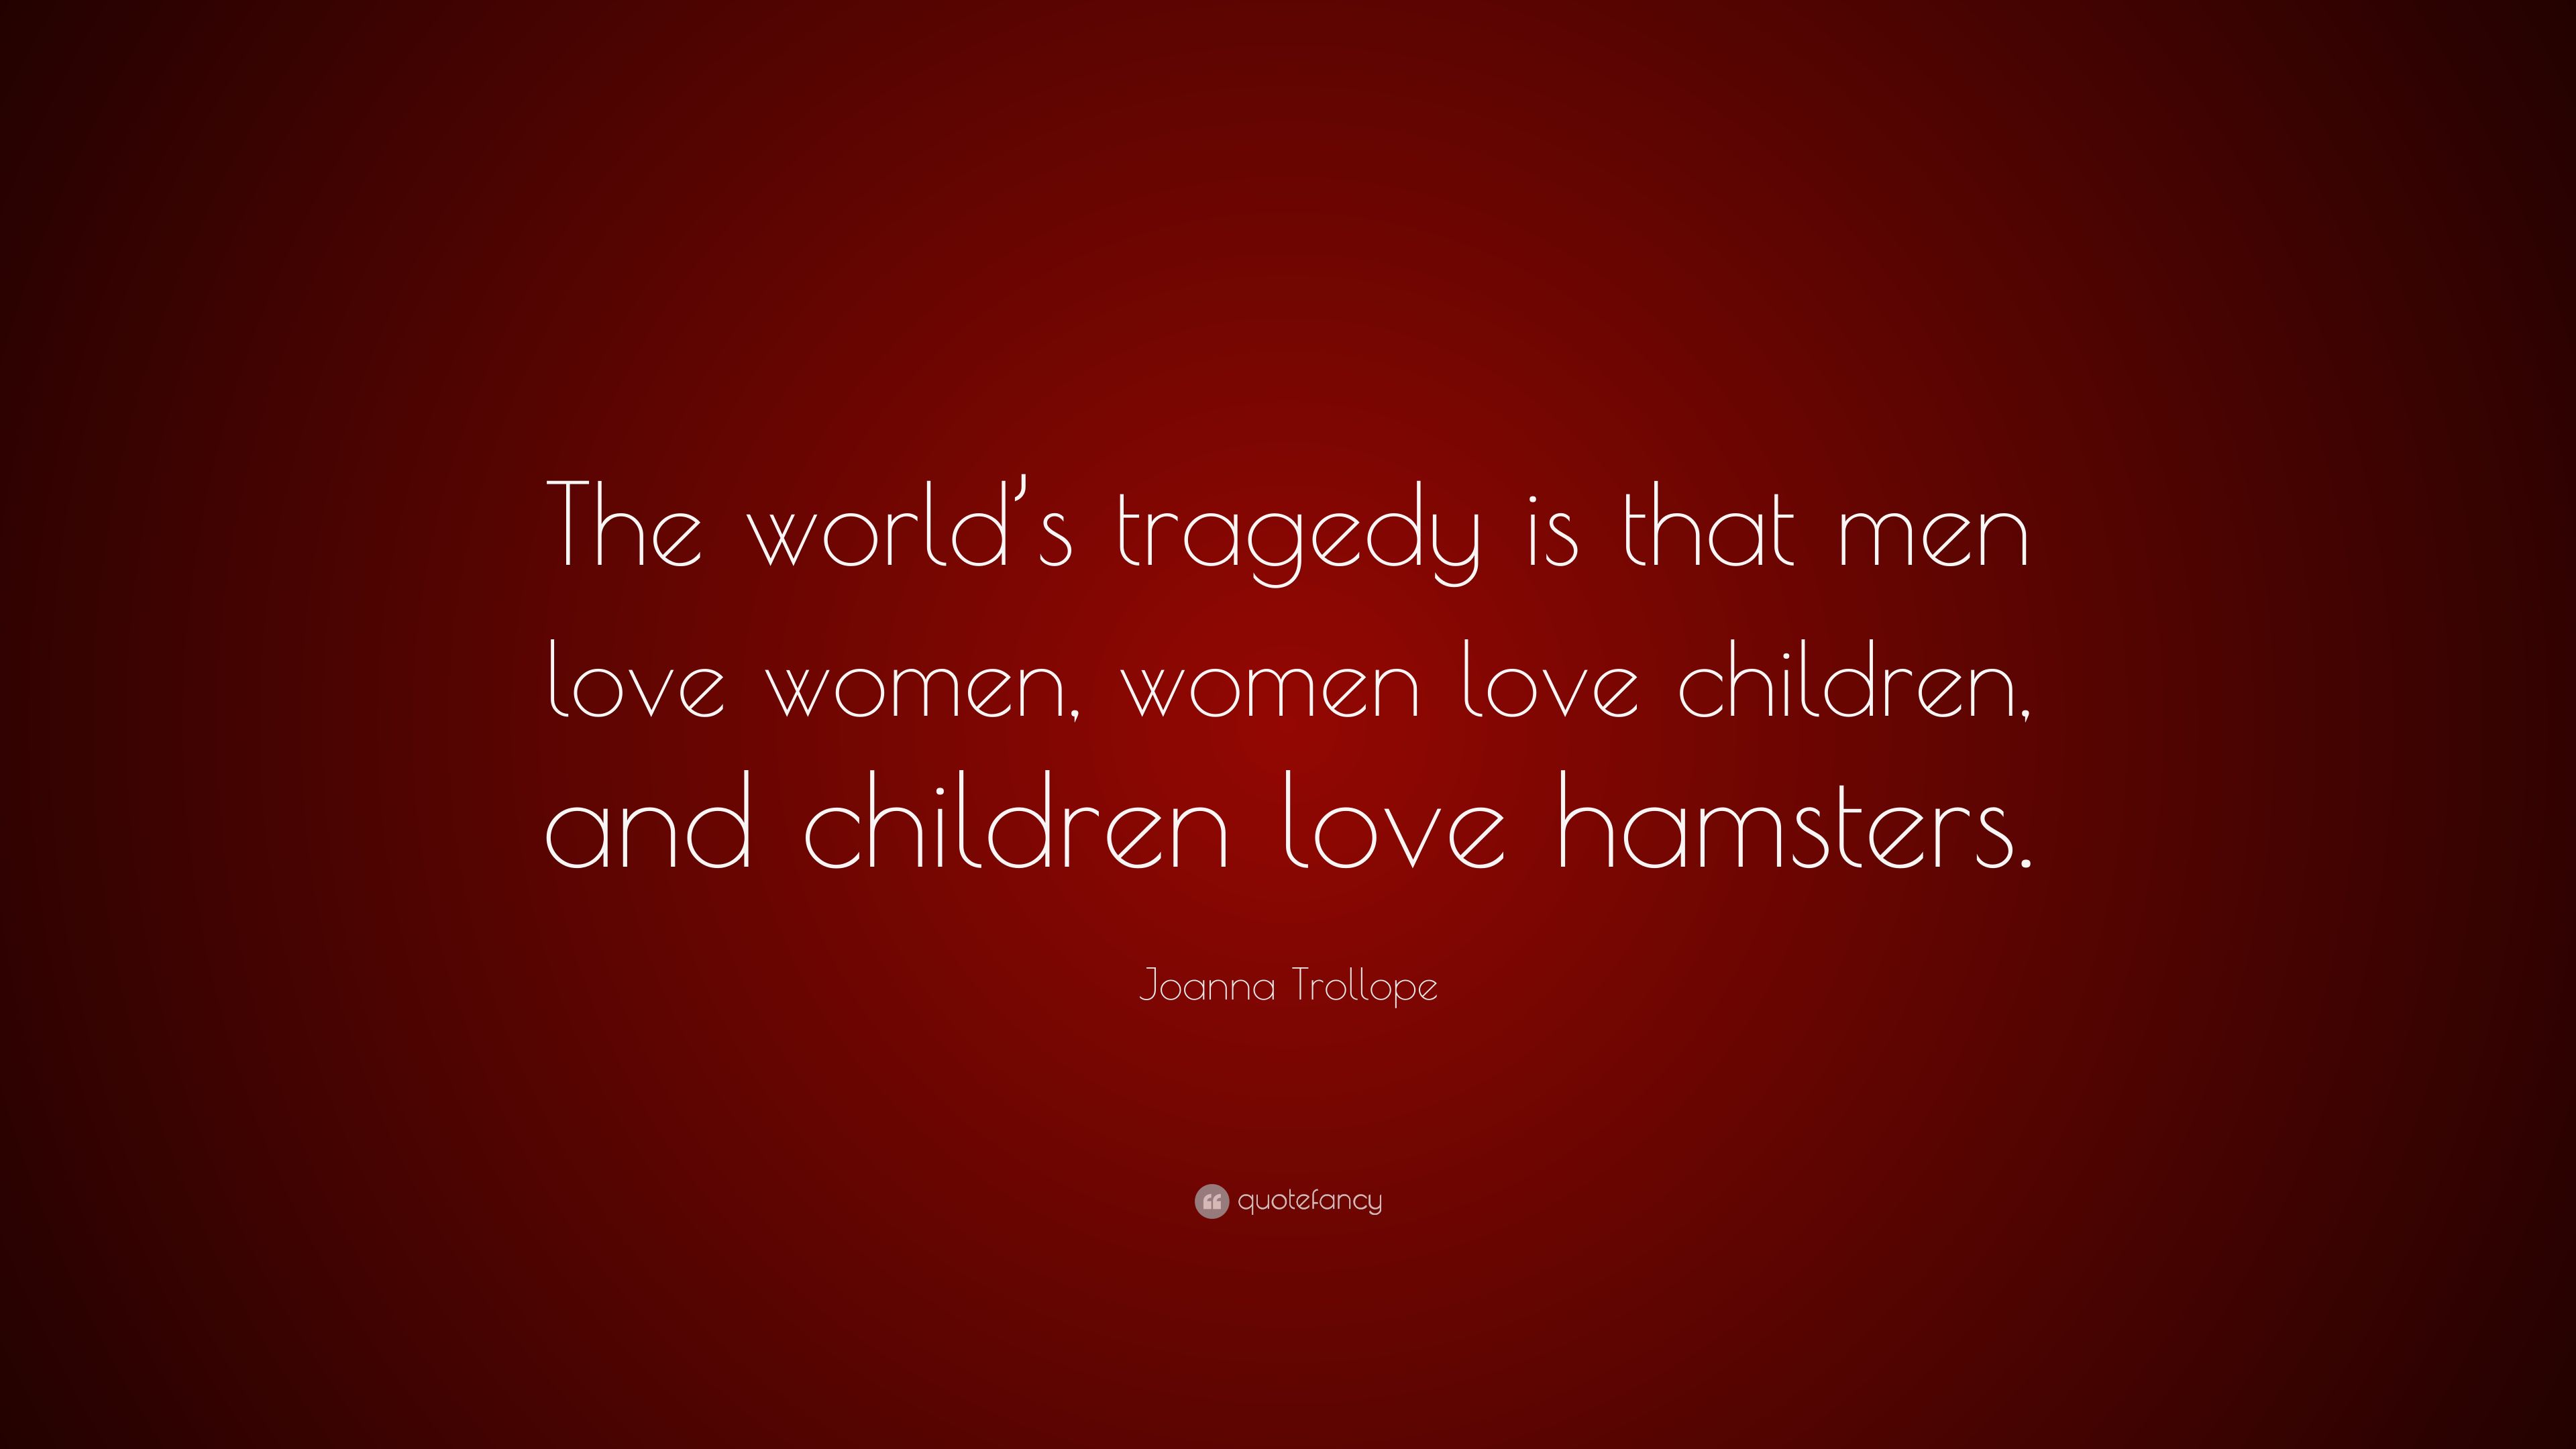 Joanna Trollope Quote: “The world's tragedy is that men love women